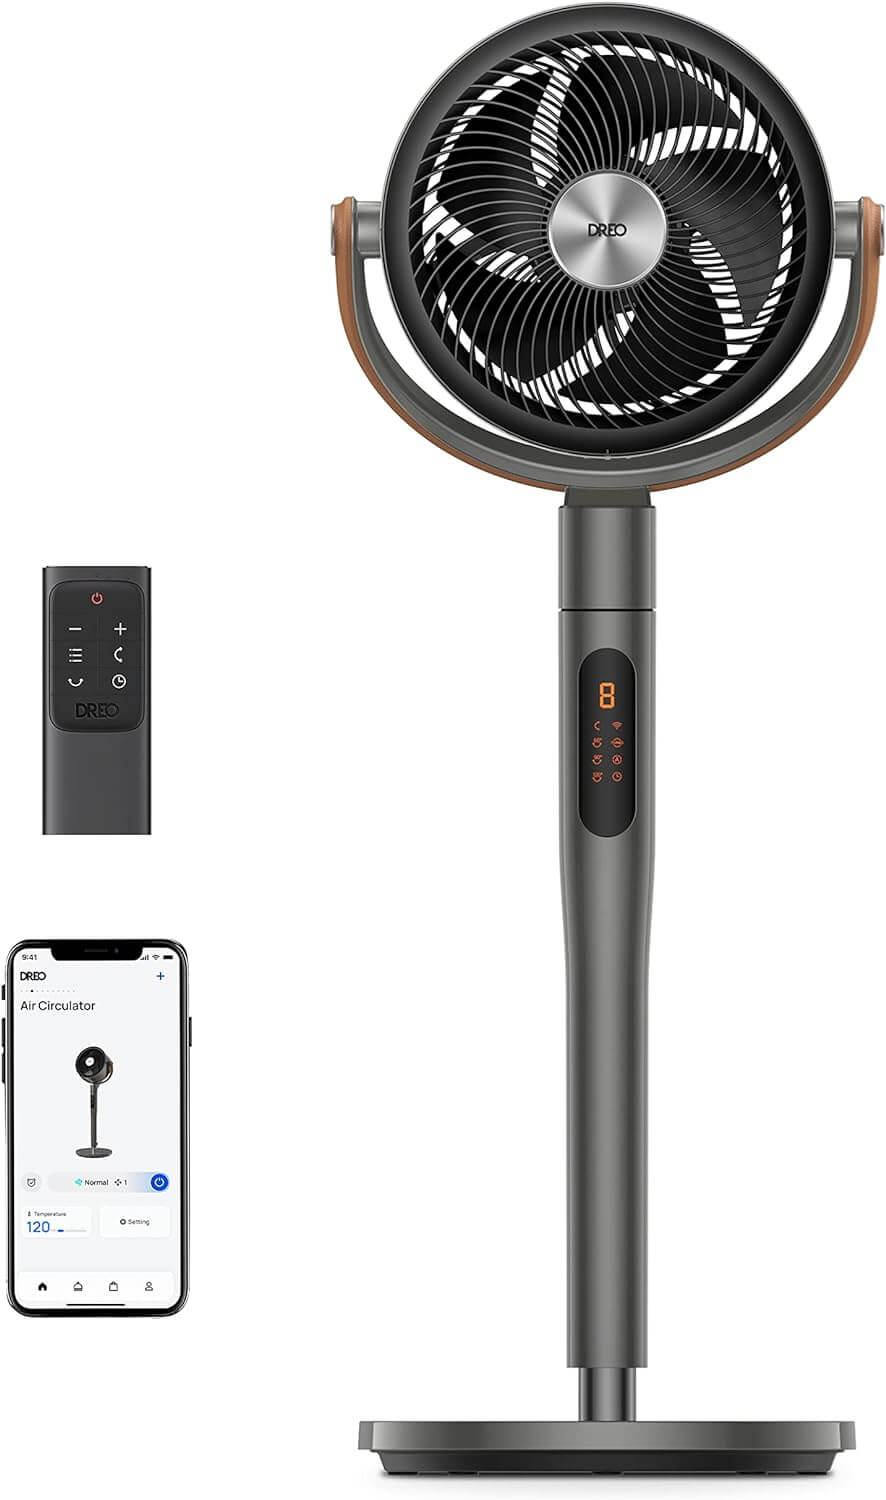 Pedestal fan with smartphone features